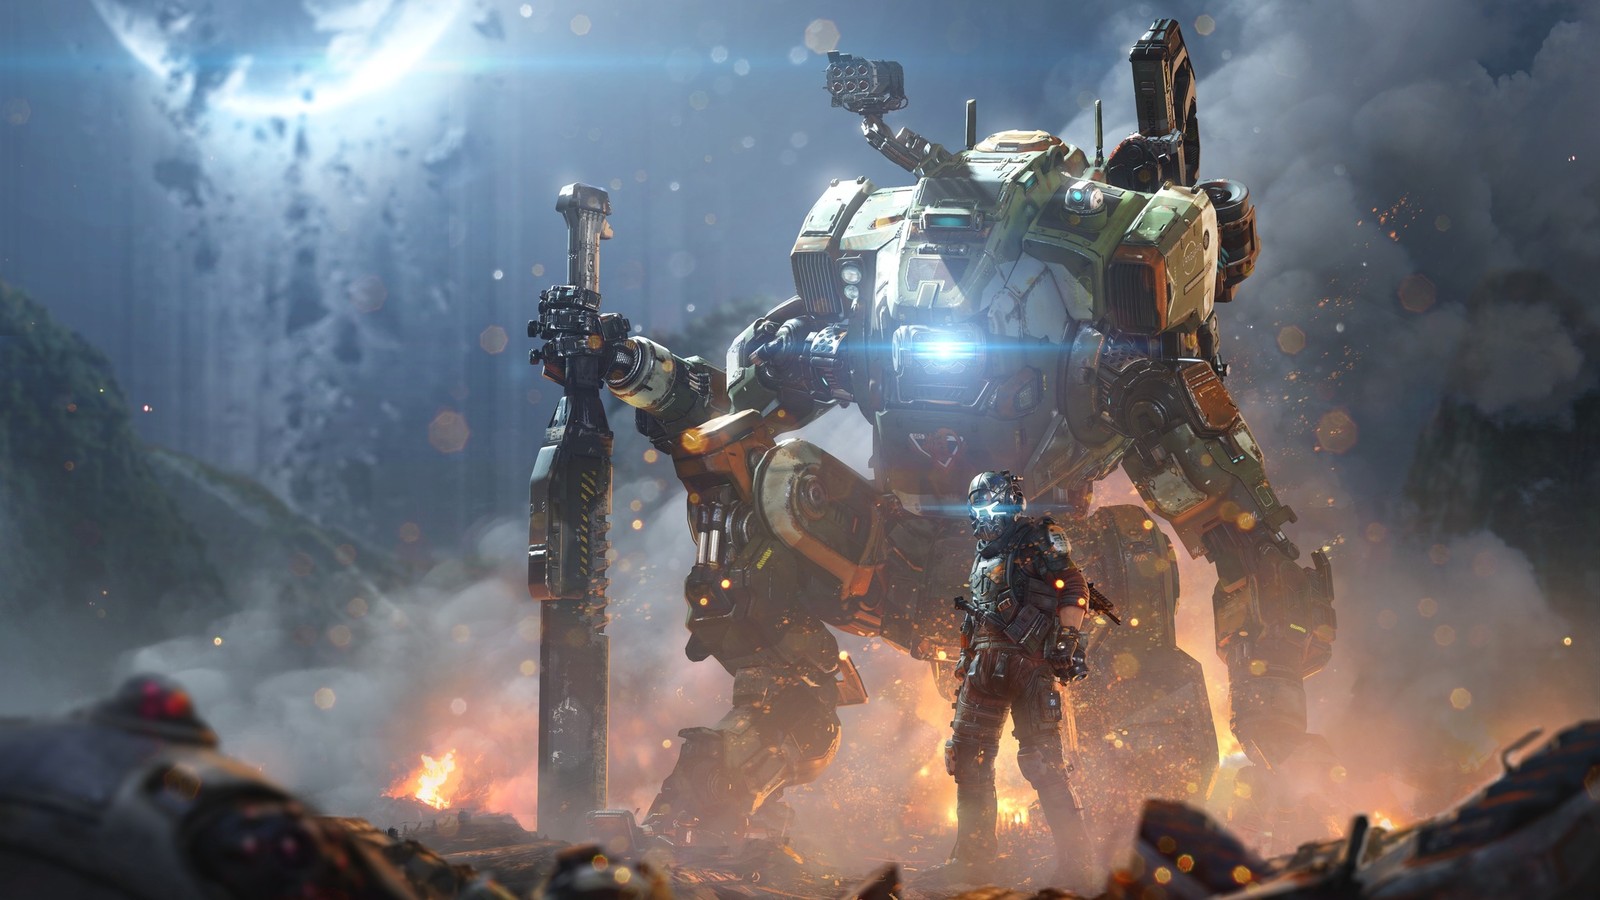 Titanfall Legends Game Was Inspired By Doom Eternal, Details On Characters  & Story